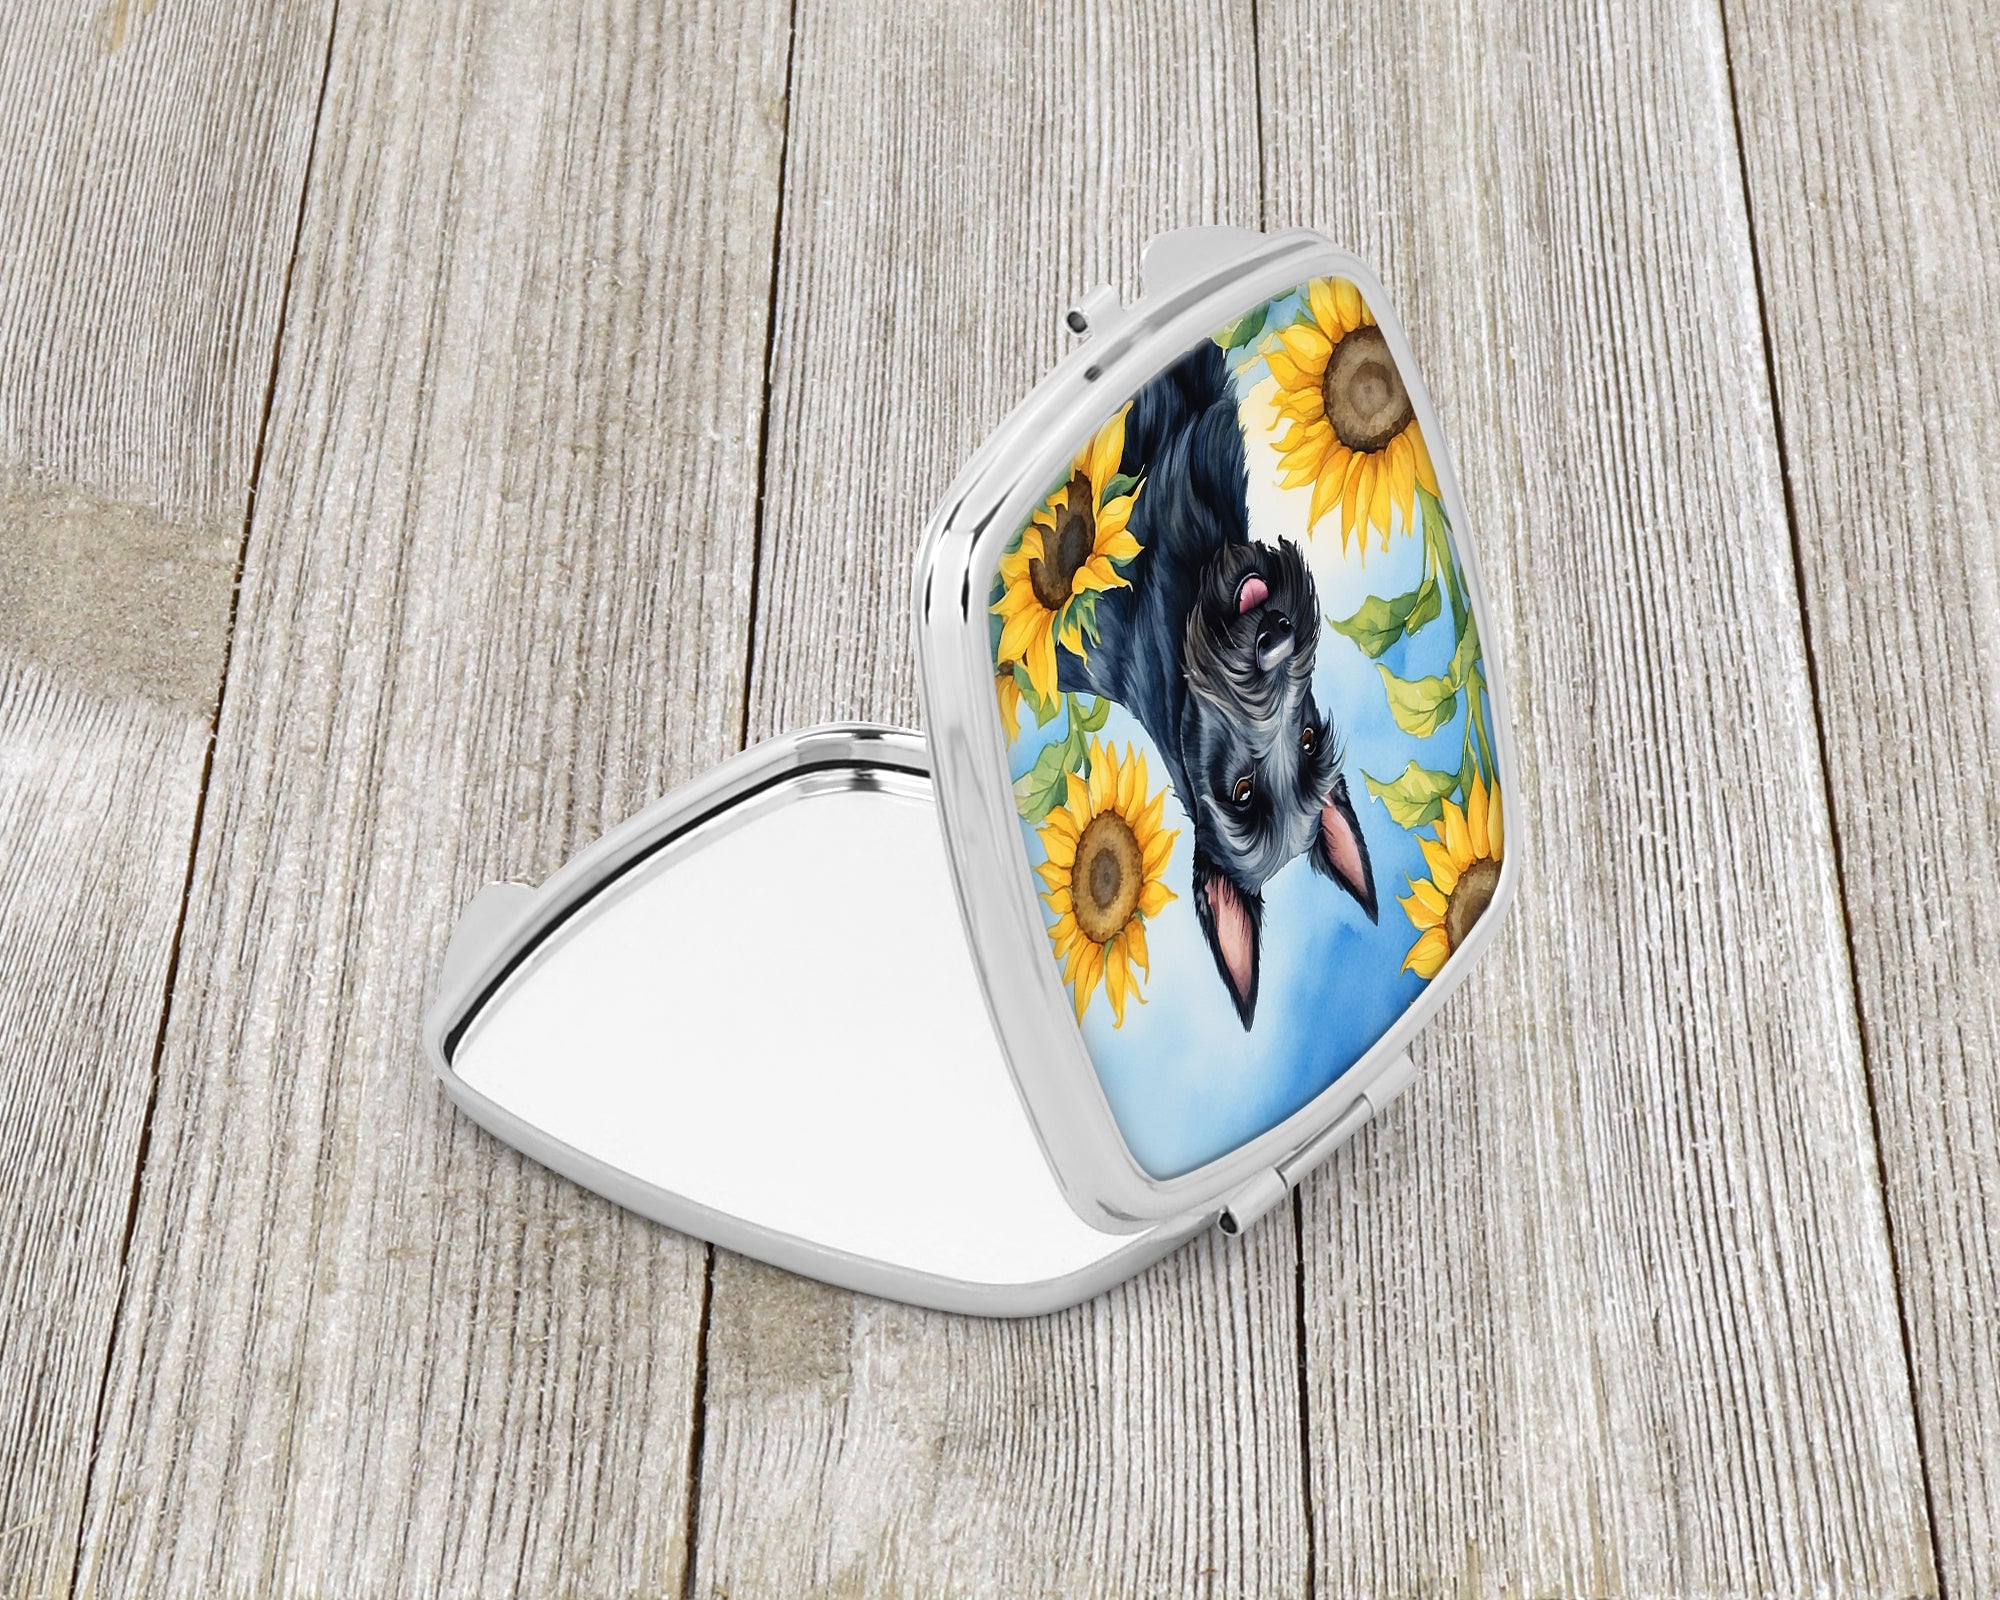 Buy this Scottish Terrier in Sunflowers Compact Mirror